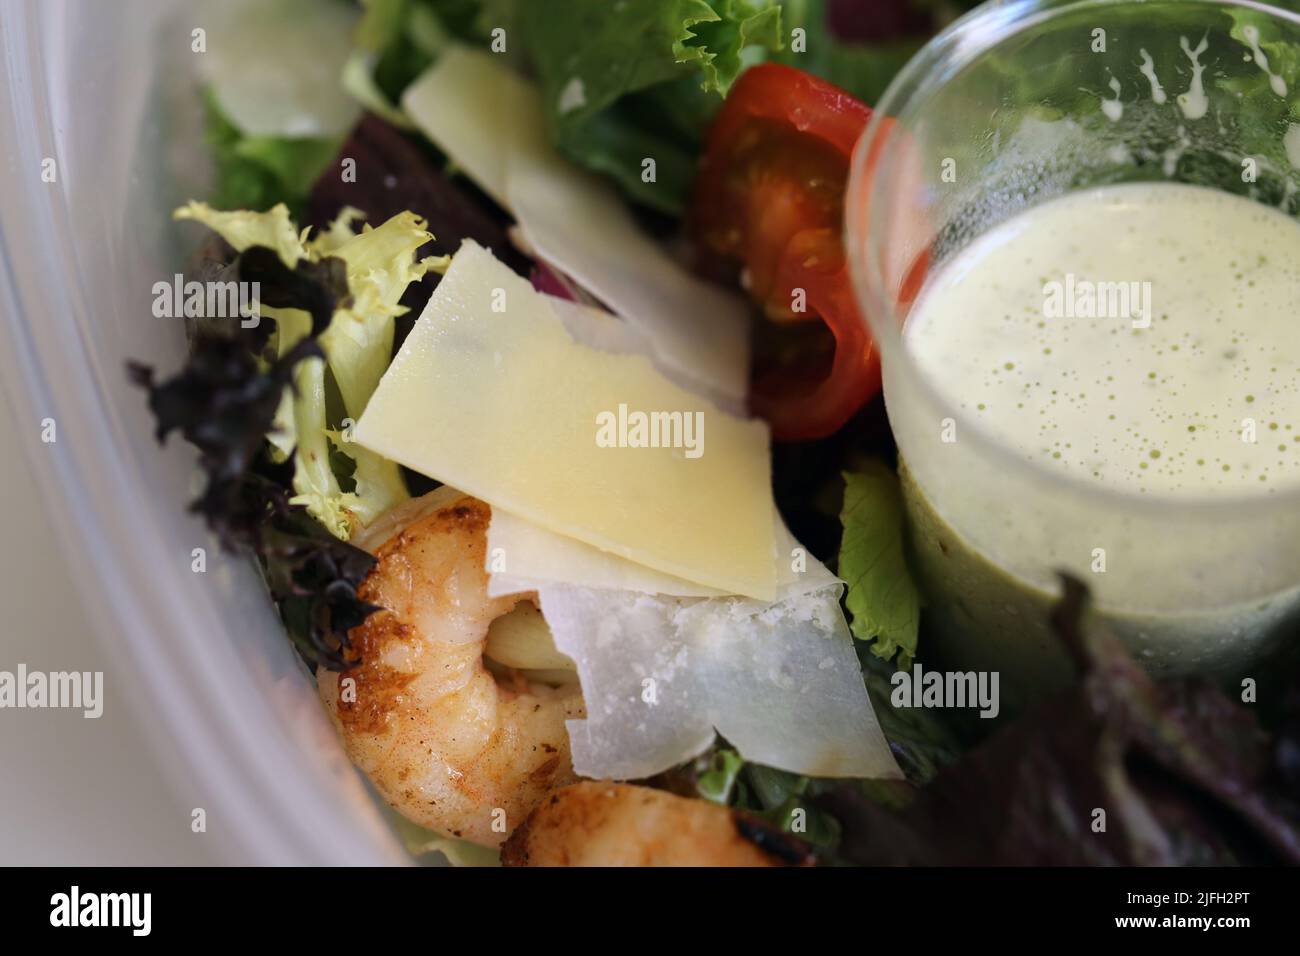 Healthy and delicious surf and turf kind of takeaway salad in a closeup. You can see some greens, chili, parmesan, scrimps, beef and salad dressing. Stock Photo